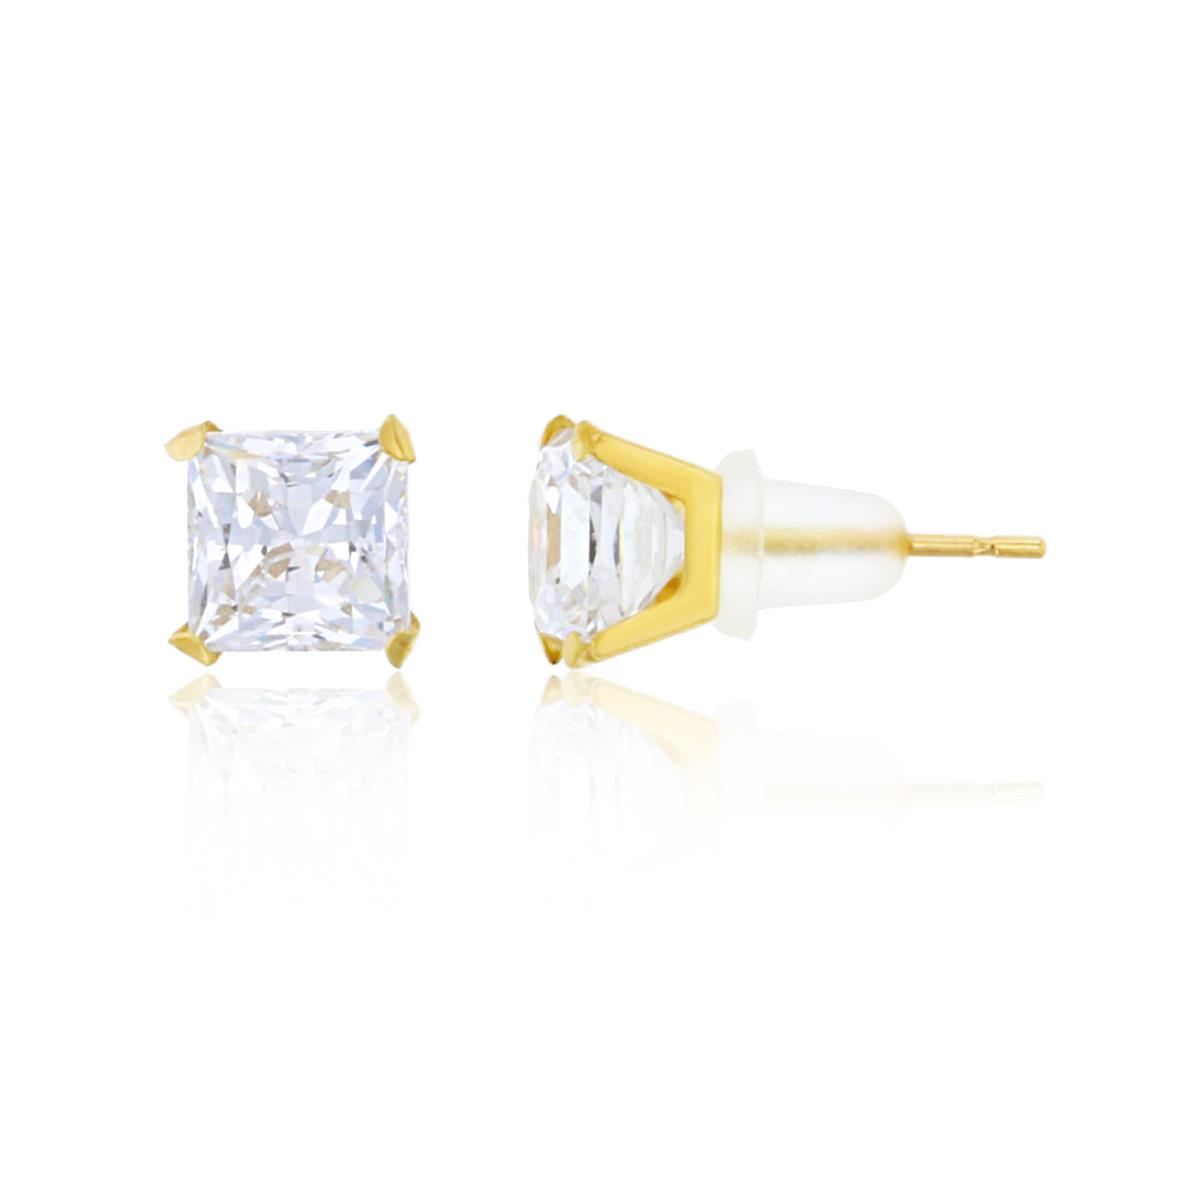 14K Yellow Gold 6.00mm 4-Prong Princess Cut Solitaire Stud & 14K Silicone Back